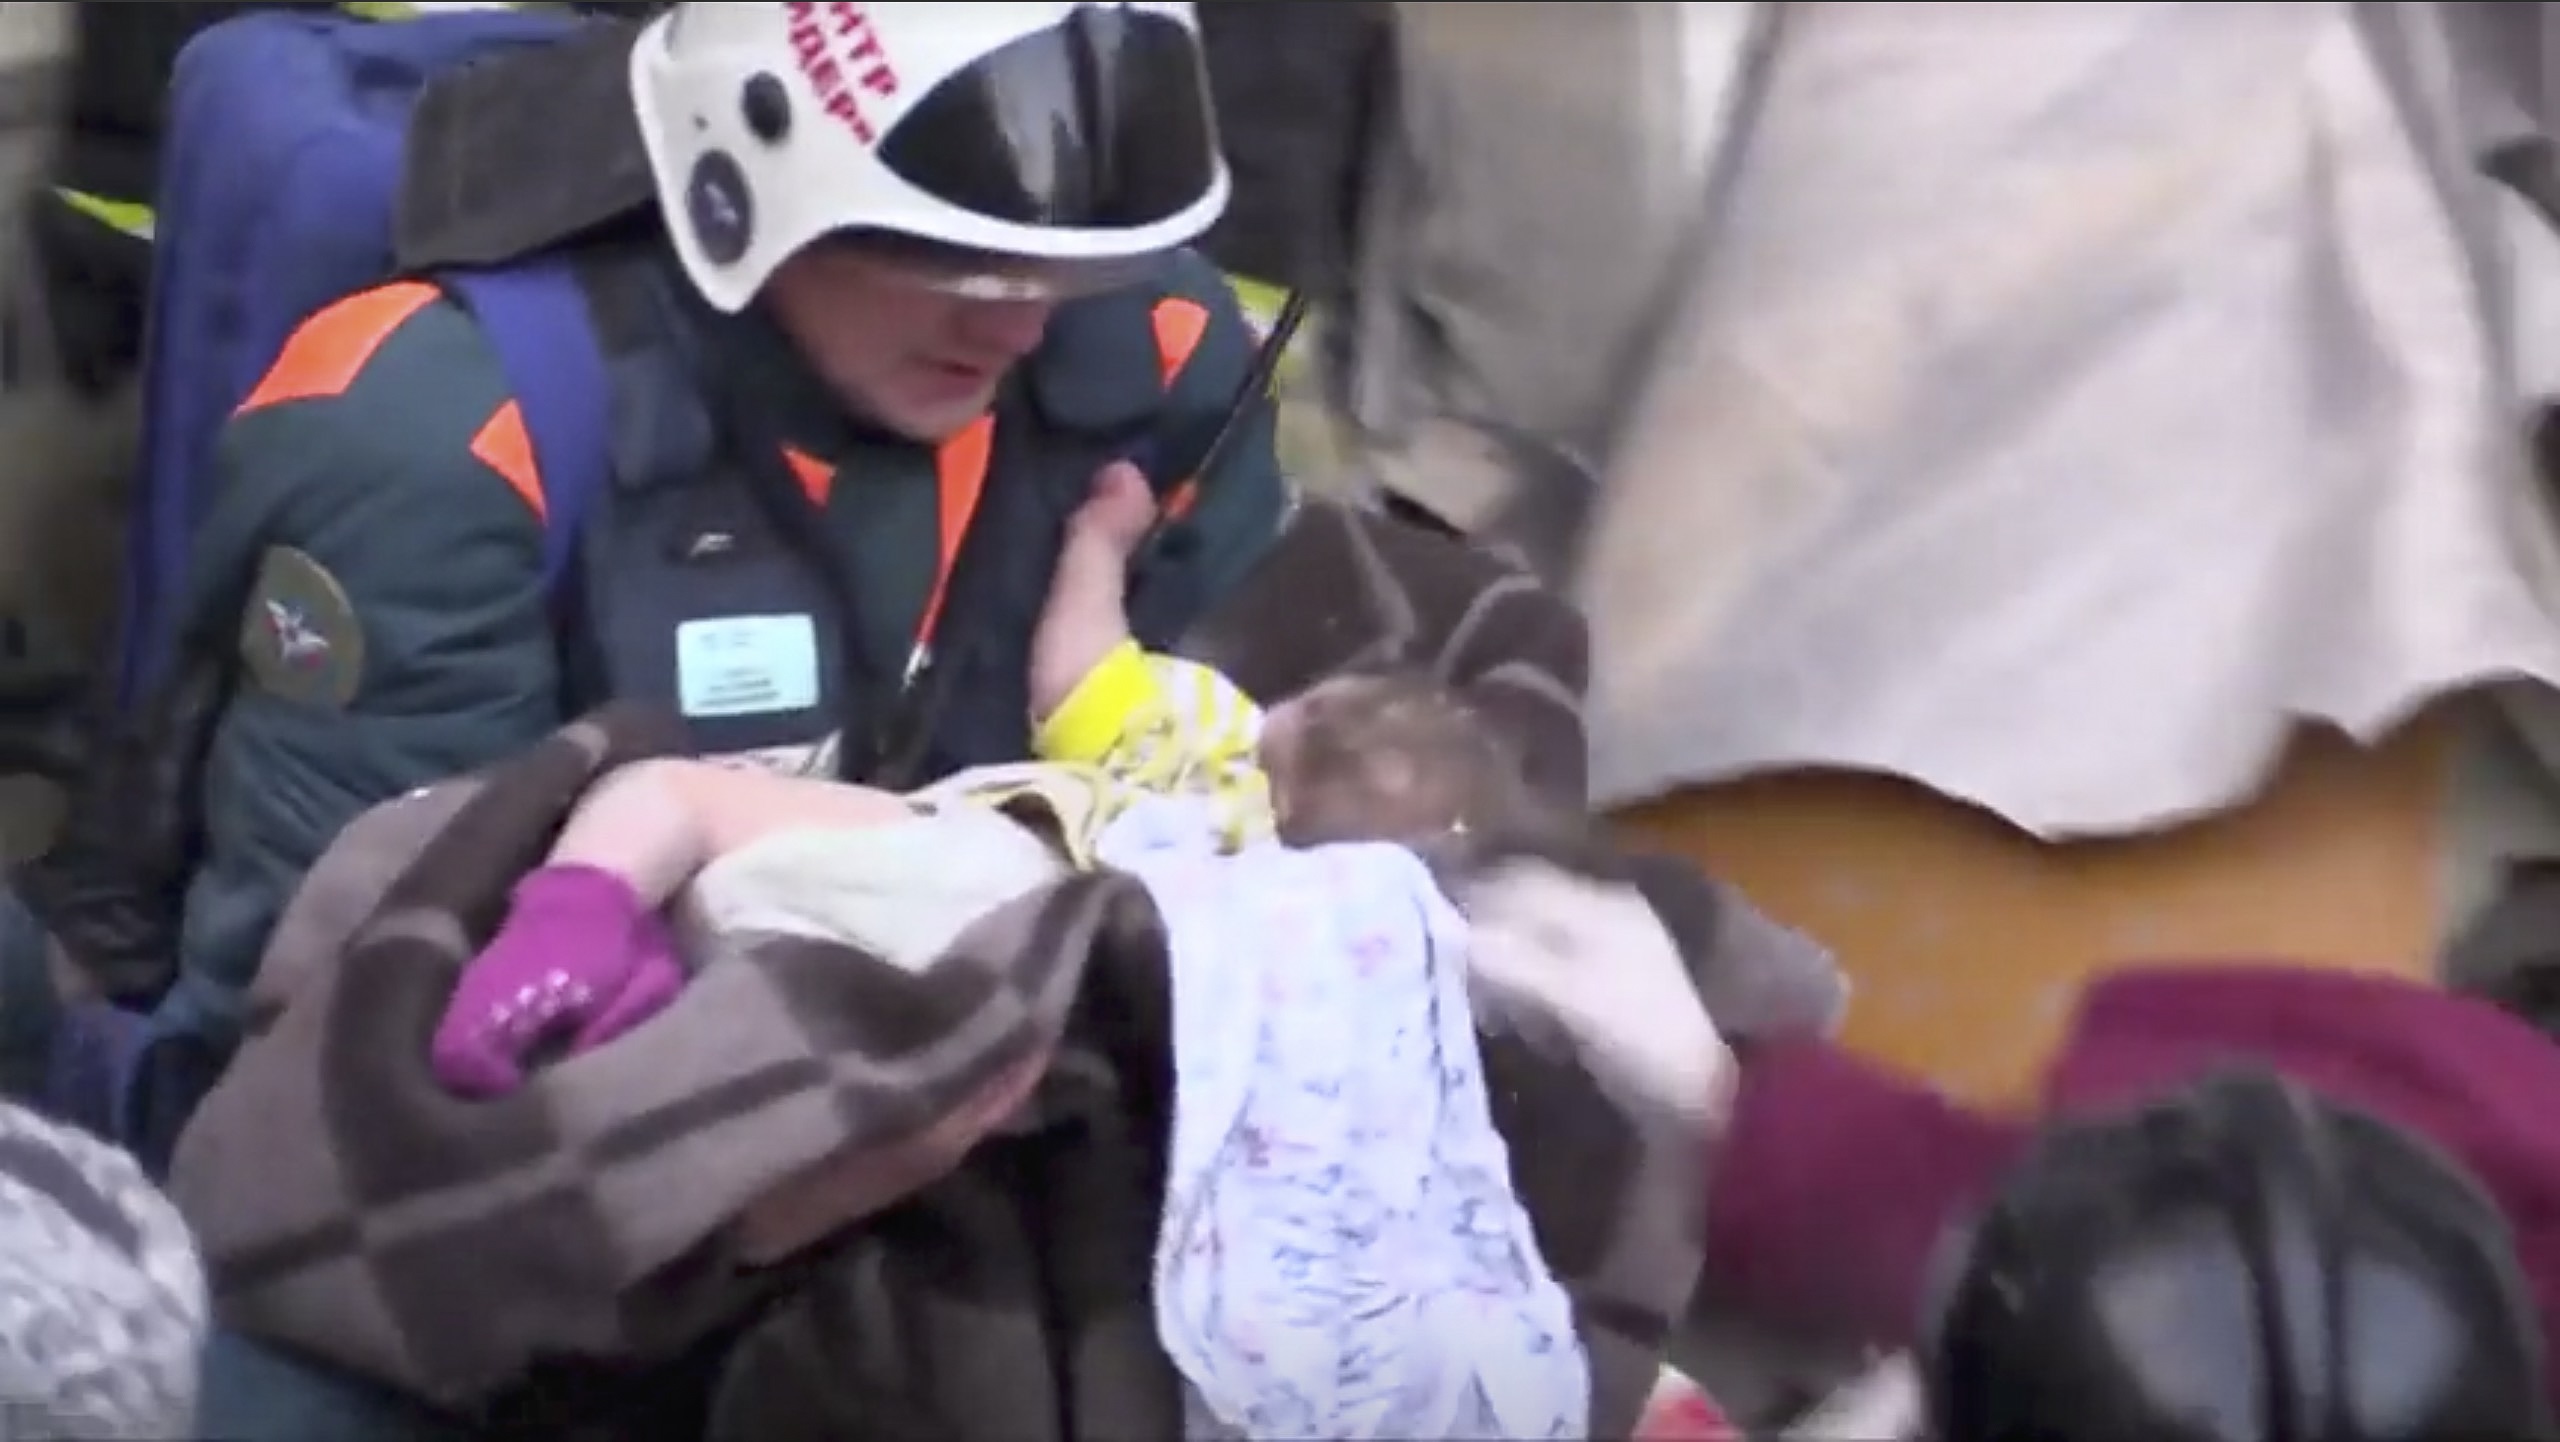 Baby boy found alive after 35 hours under rubble after Russia blast